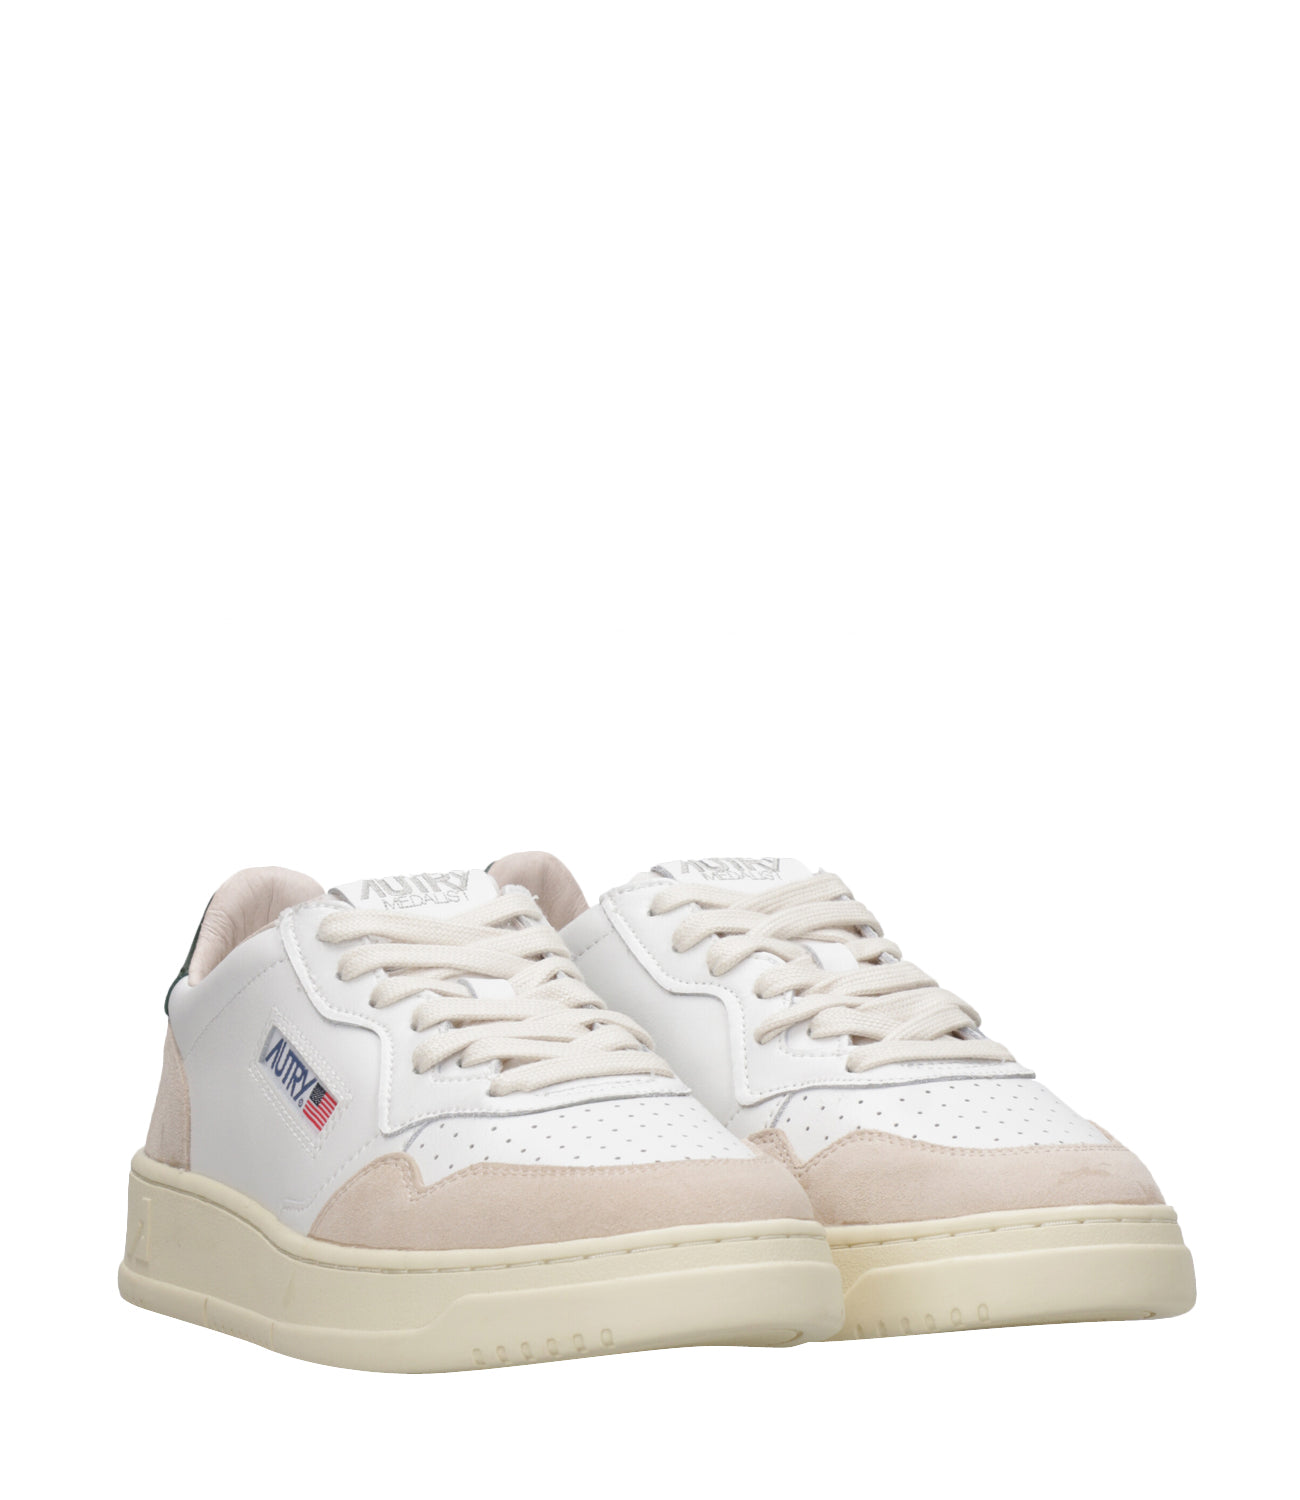 Autry | Medalist Low White and Green Sneakers